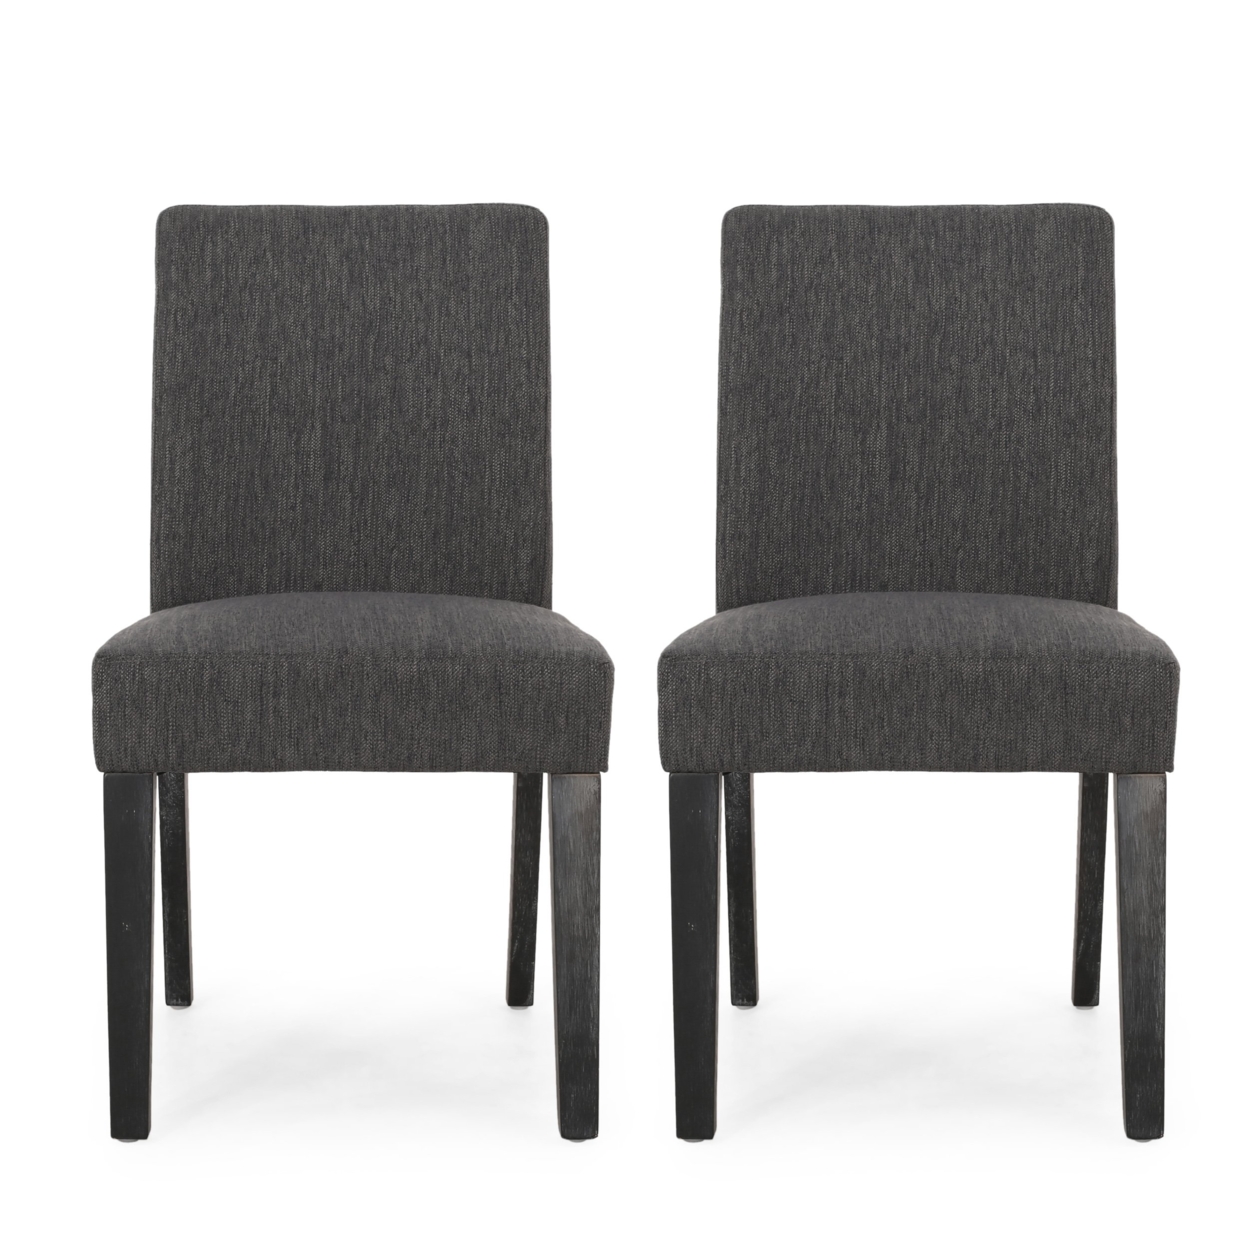 Pocatello Contemporary Upholstered Dining Chair, Set Of 2 - Charcoal/Grey